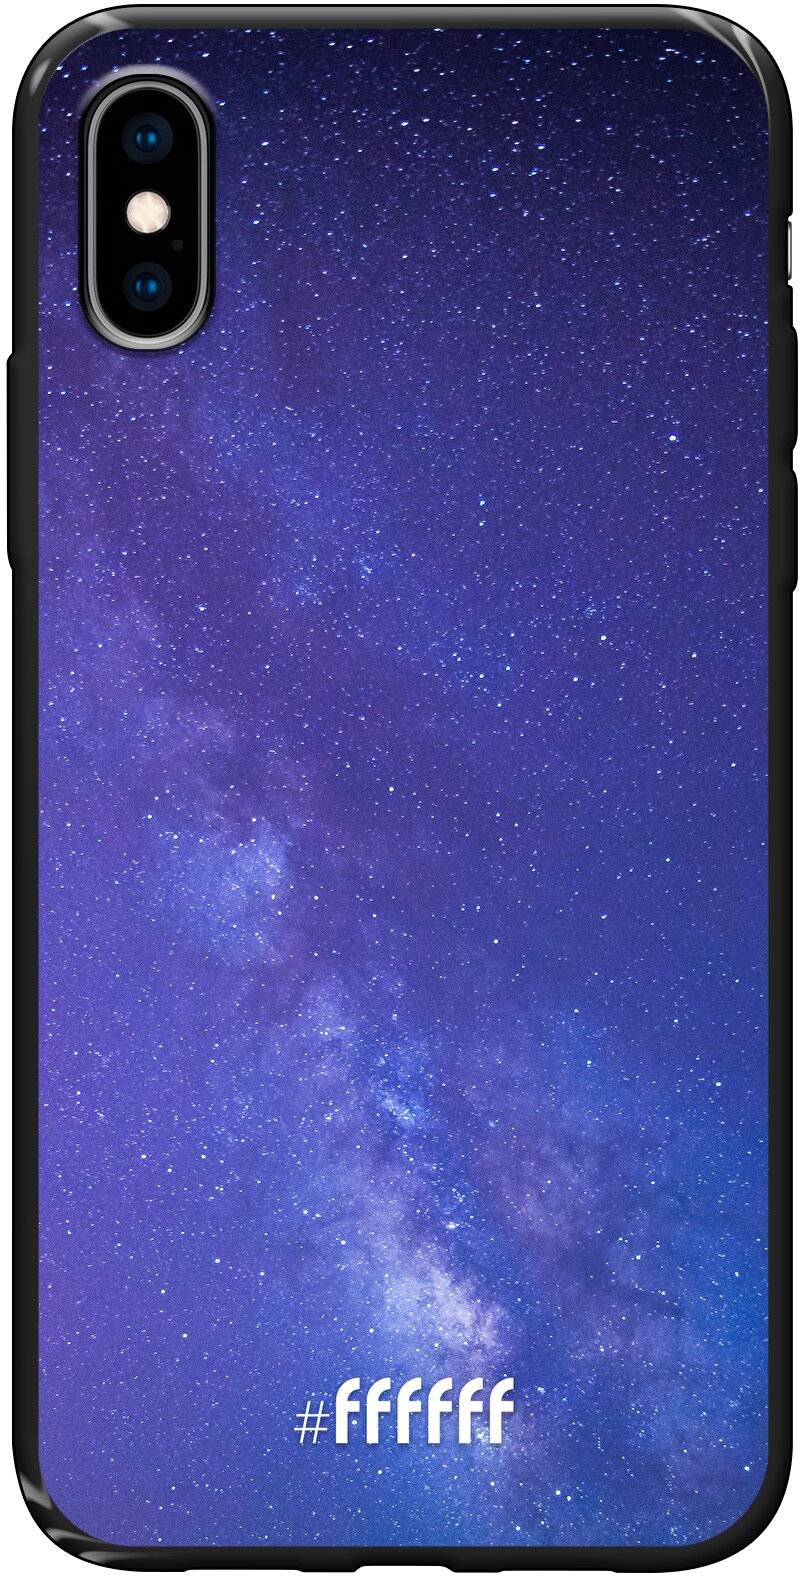 Star Cluster iPhone X